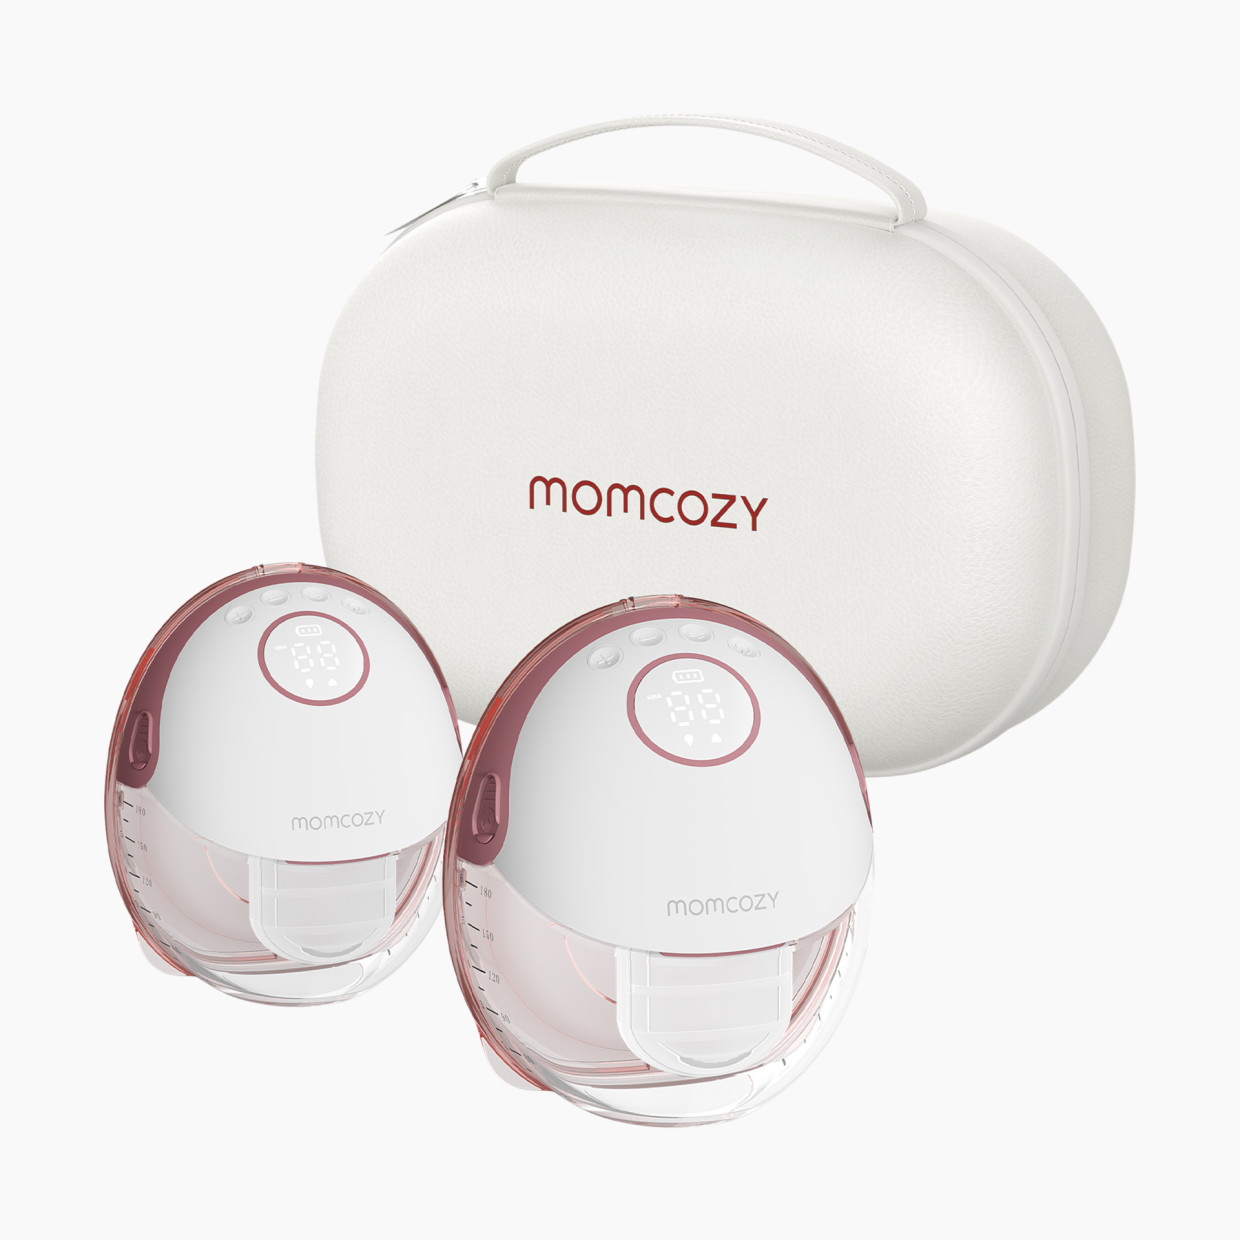 Momcozy "Mobile Style" Wearable Electric Breast Pump - Double.